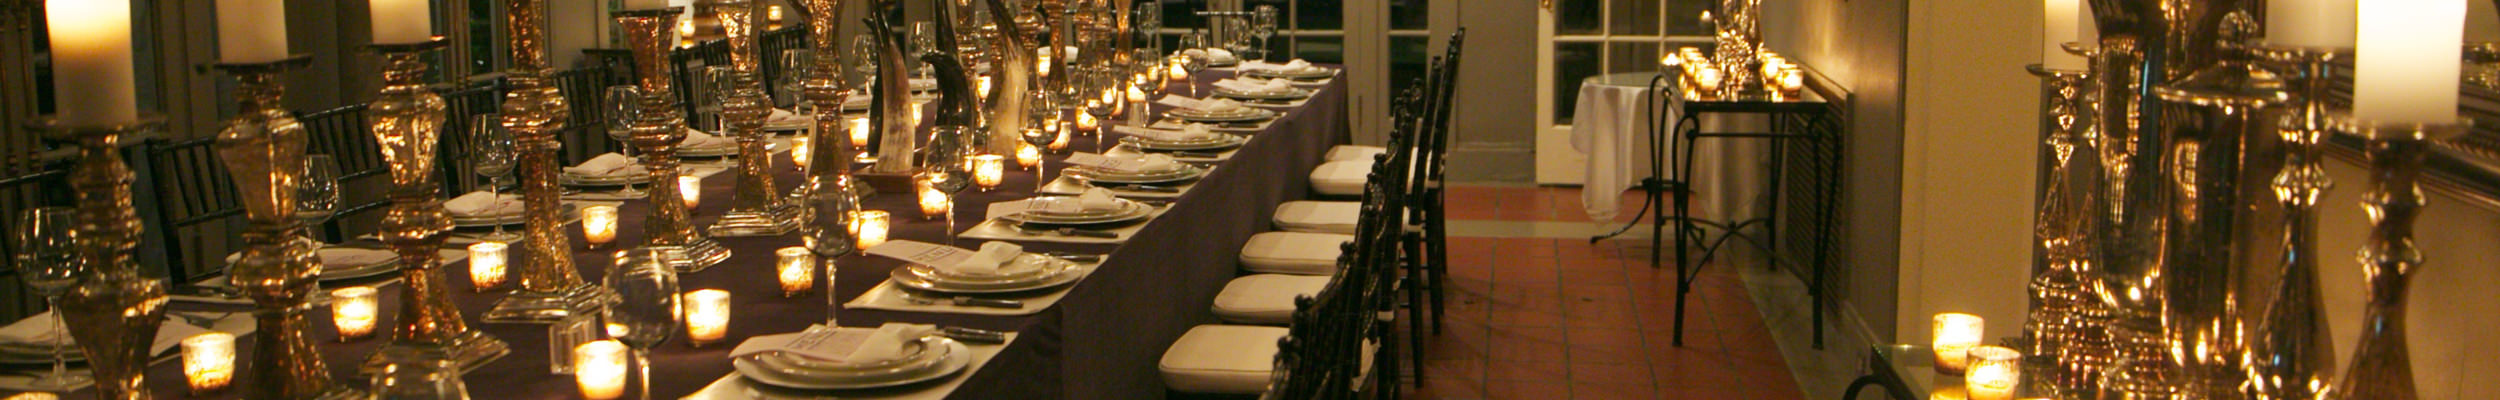 Exclusive Dinner Party - Liberty Event Rentals